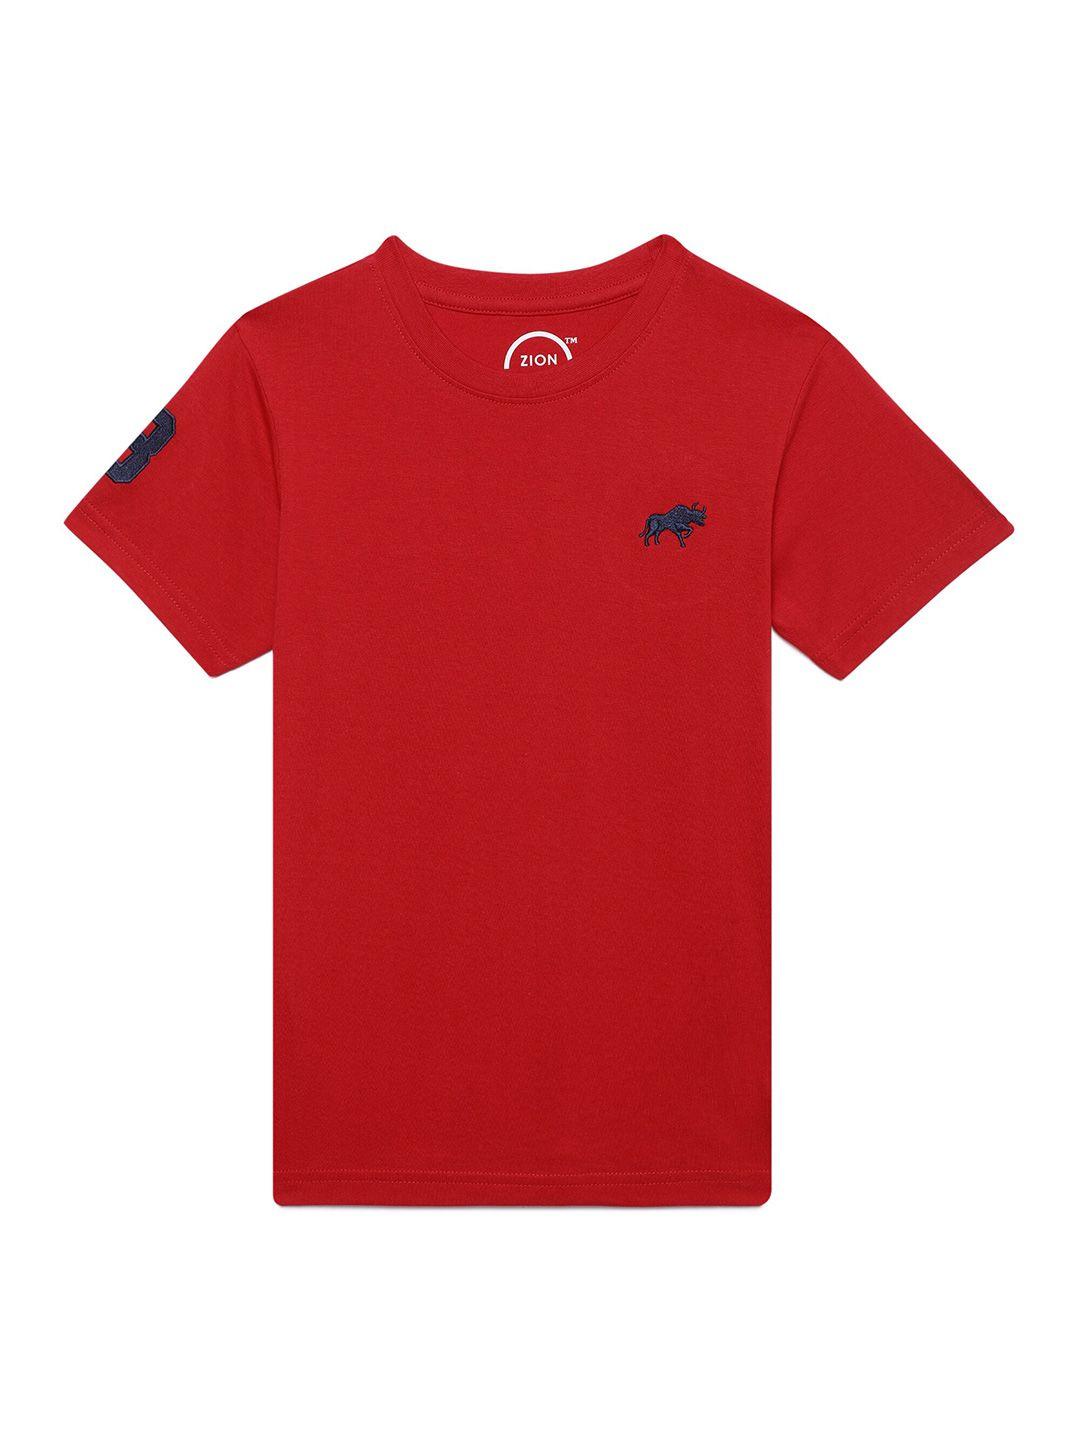 ZION Boys Red Slim Fit T-shirt